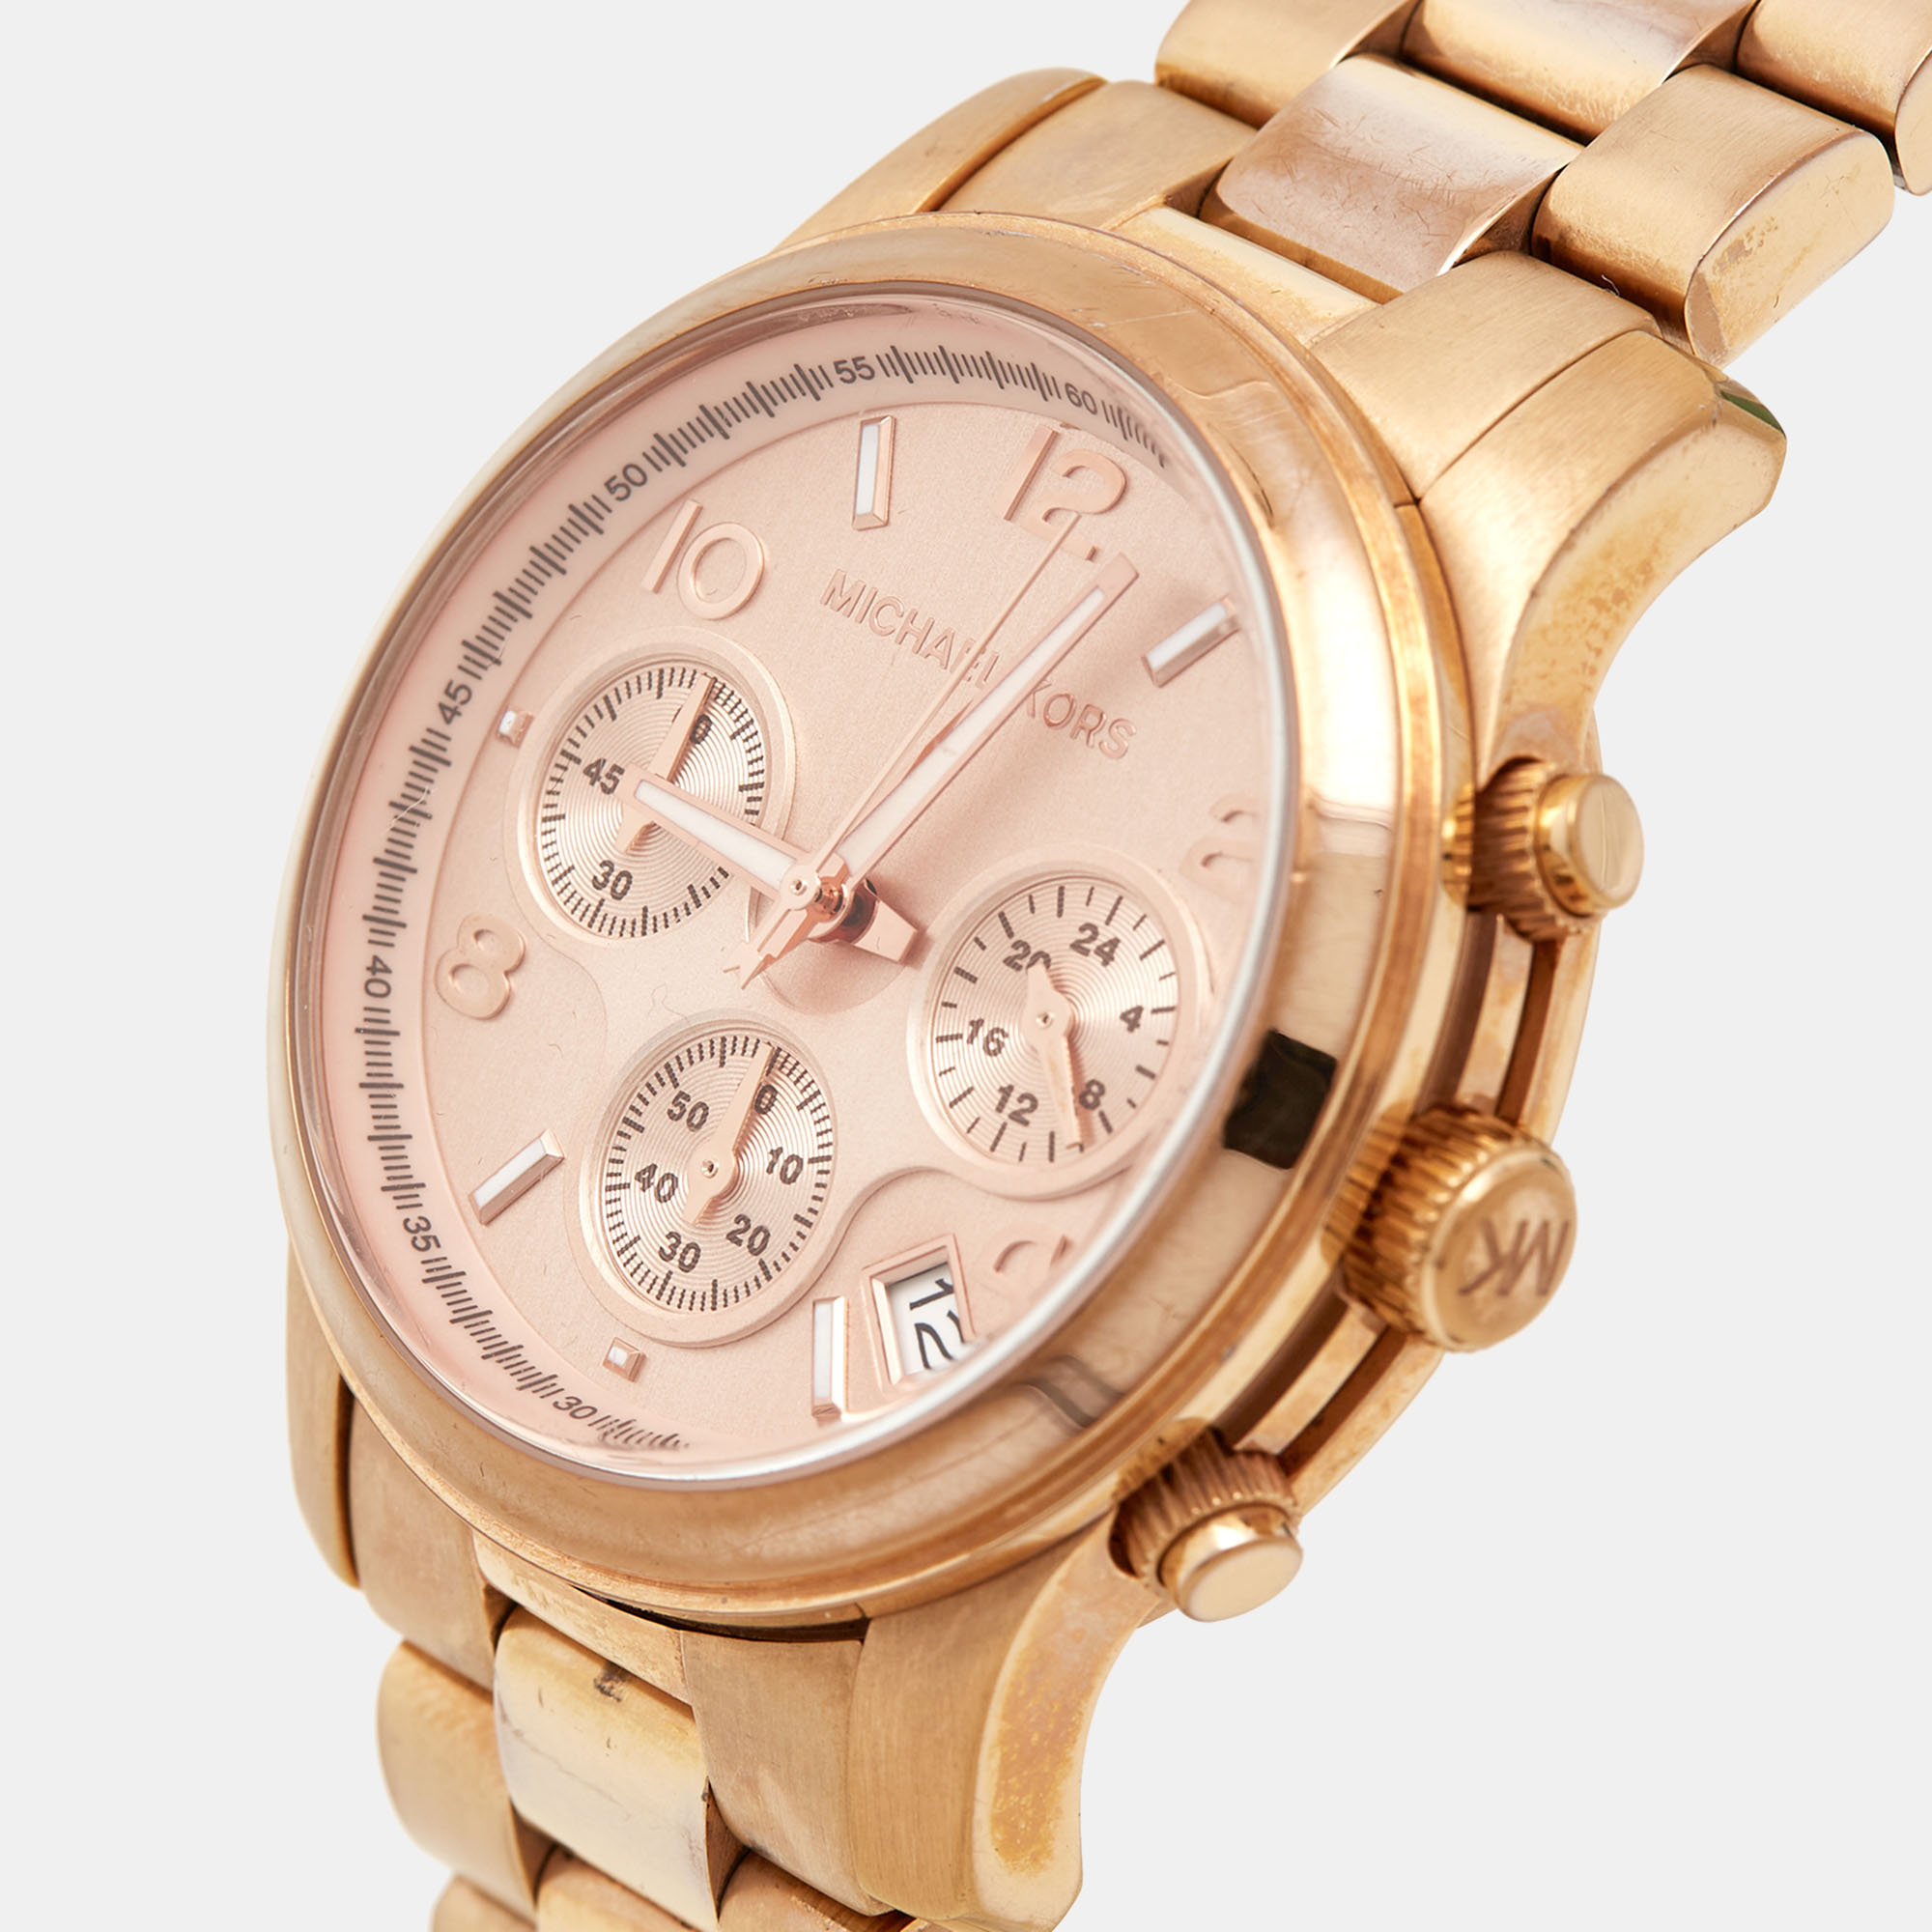 

Michael Kors Champagne Rose Gold Plated Stainless Steel Runway MK5128 Women's Wristwatch